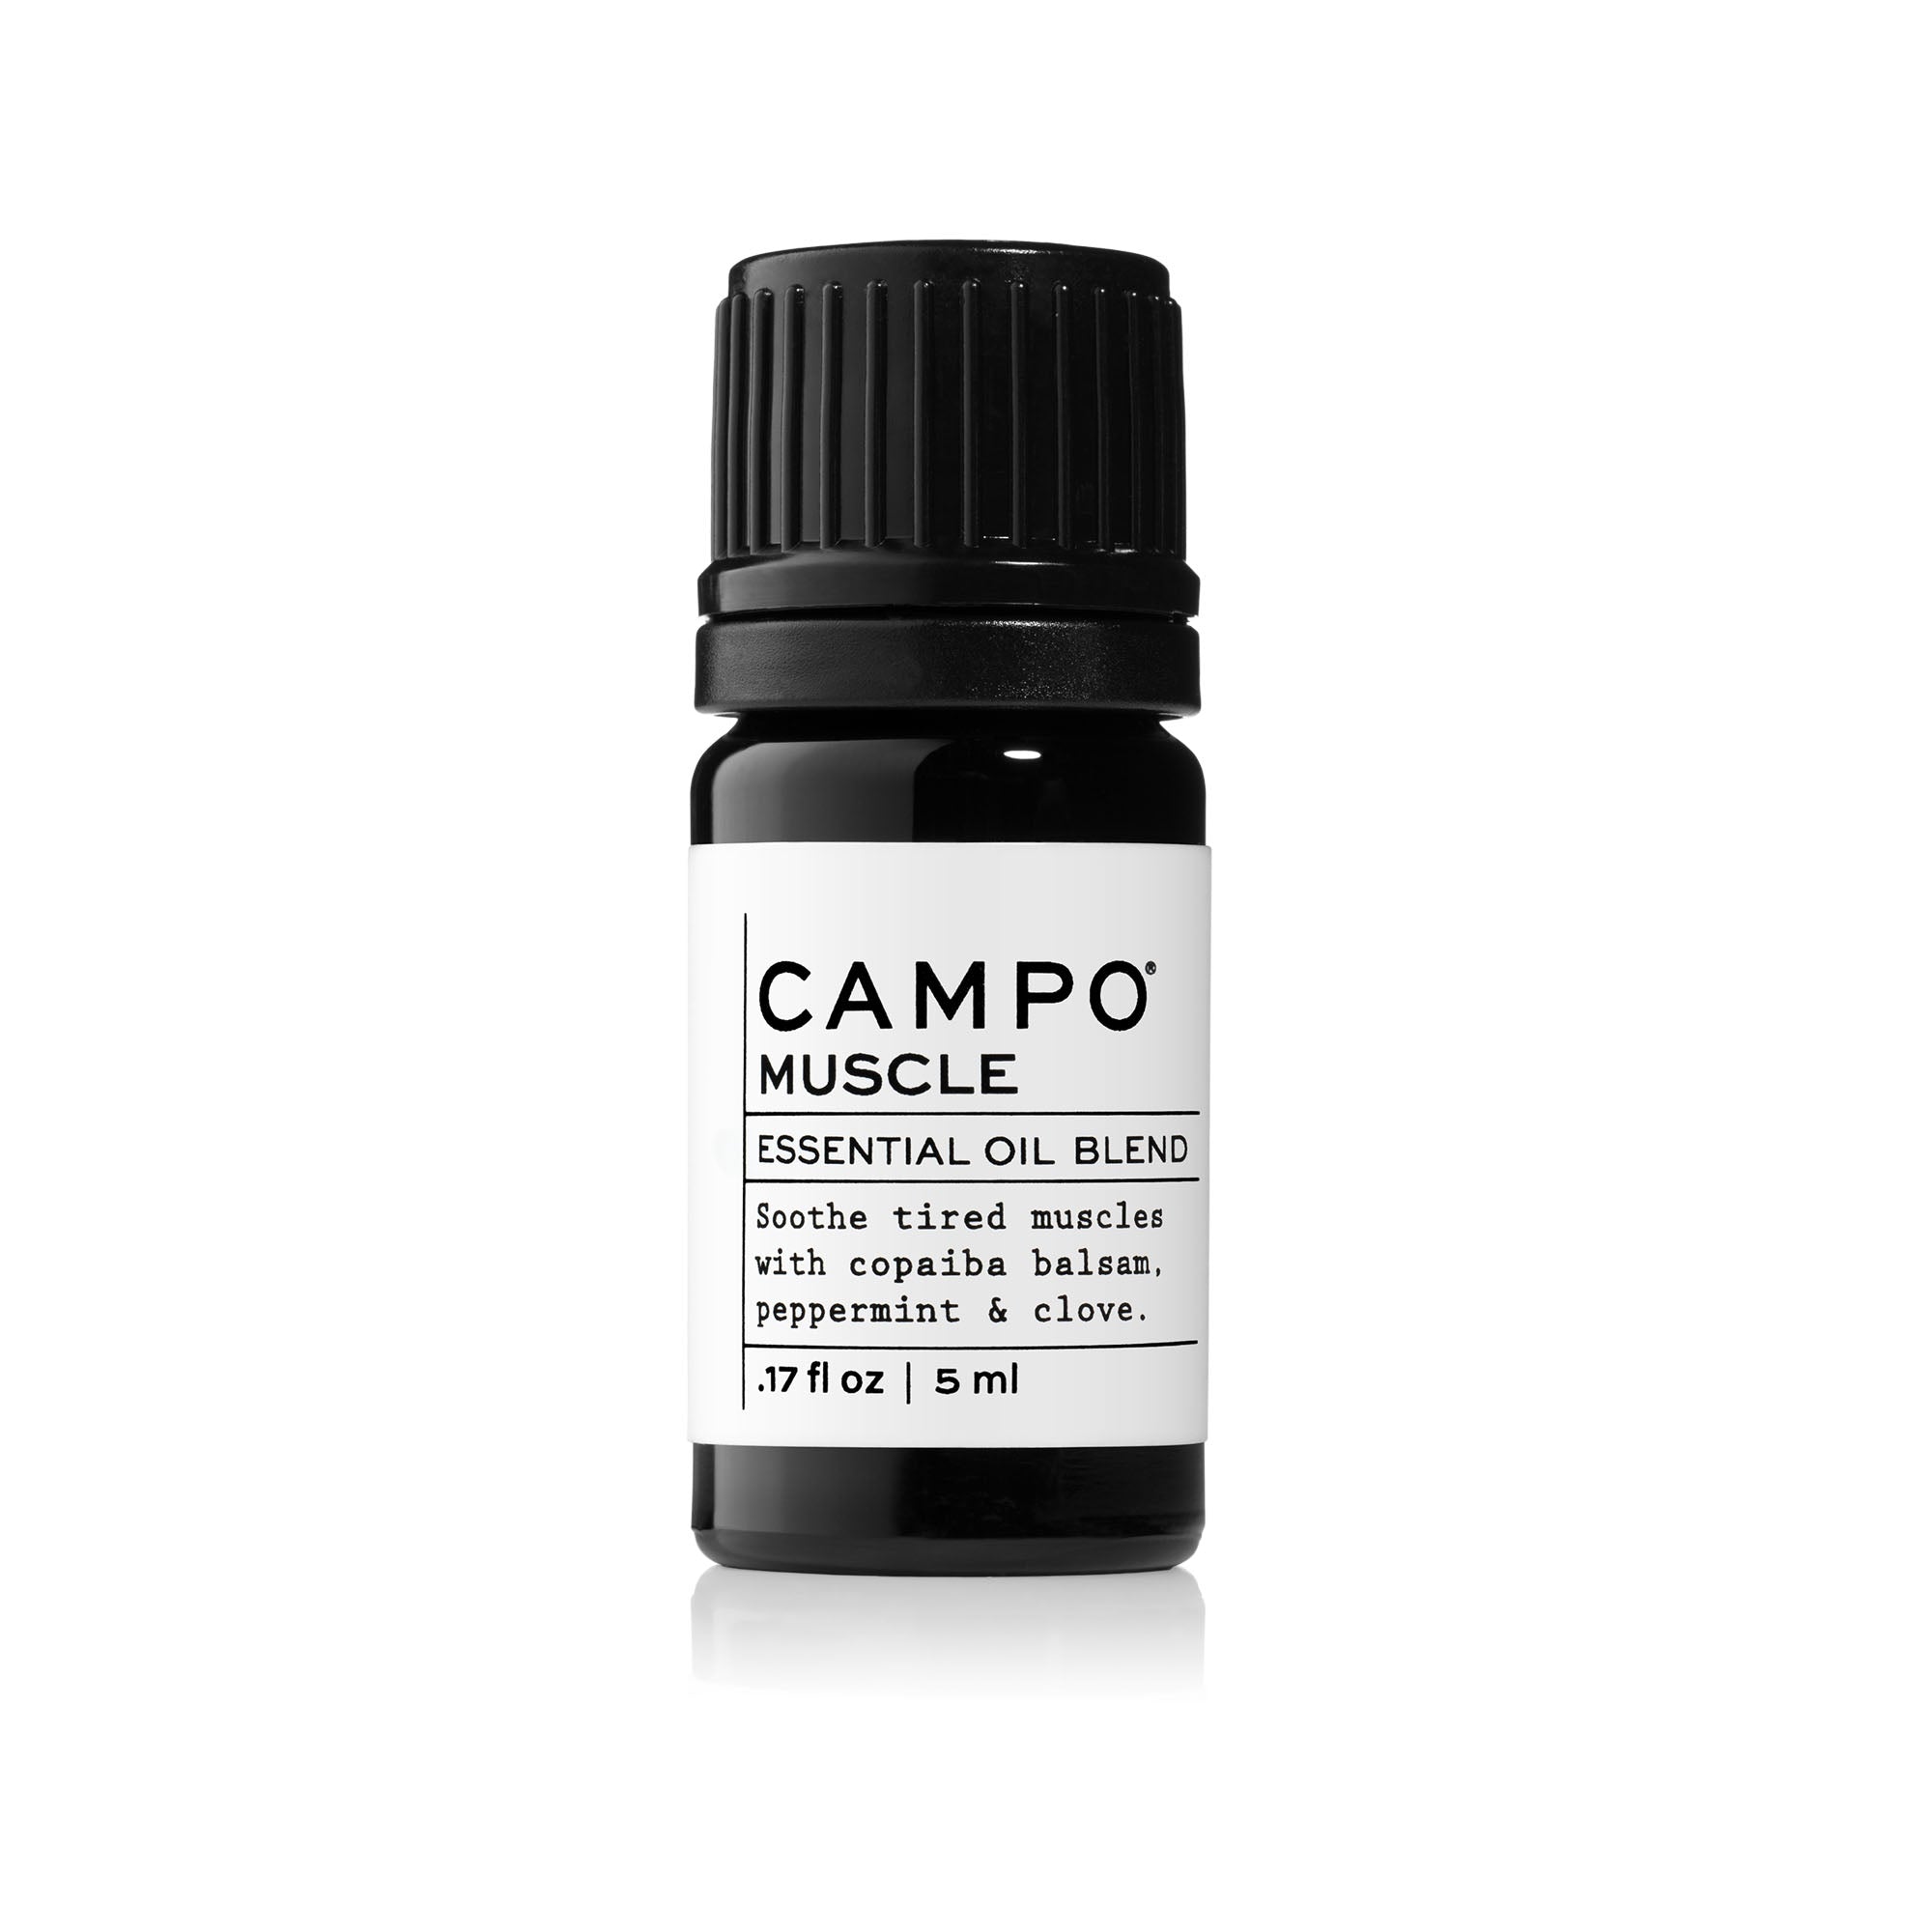 Campo Beauty MUSCLE Blend 5 ml and 15 ml Essential Oil. Soothe sore muscles & pain with this 100% natural essential oil blend of copaiba balsam, peppermint & clove.